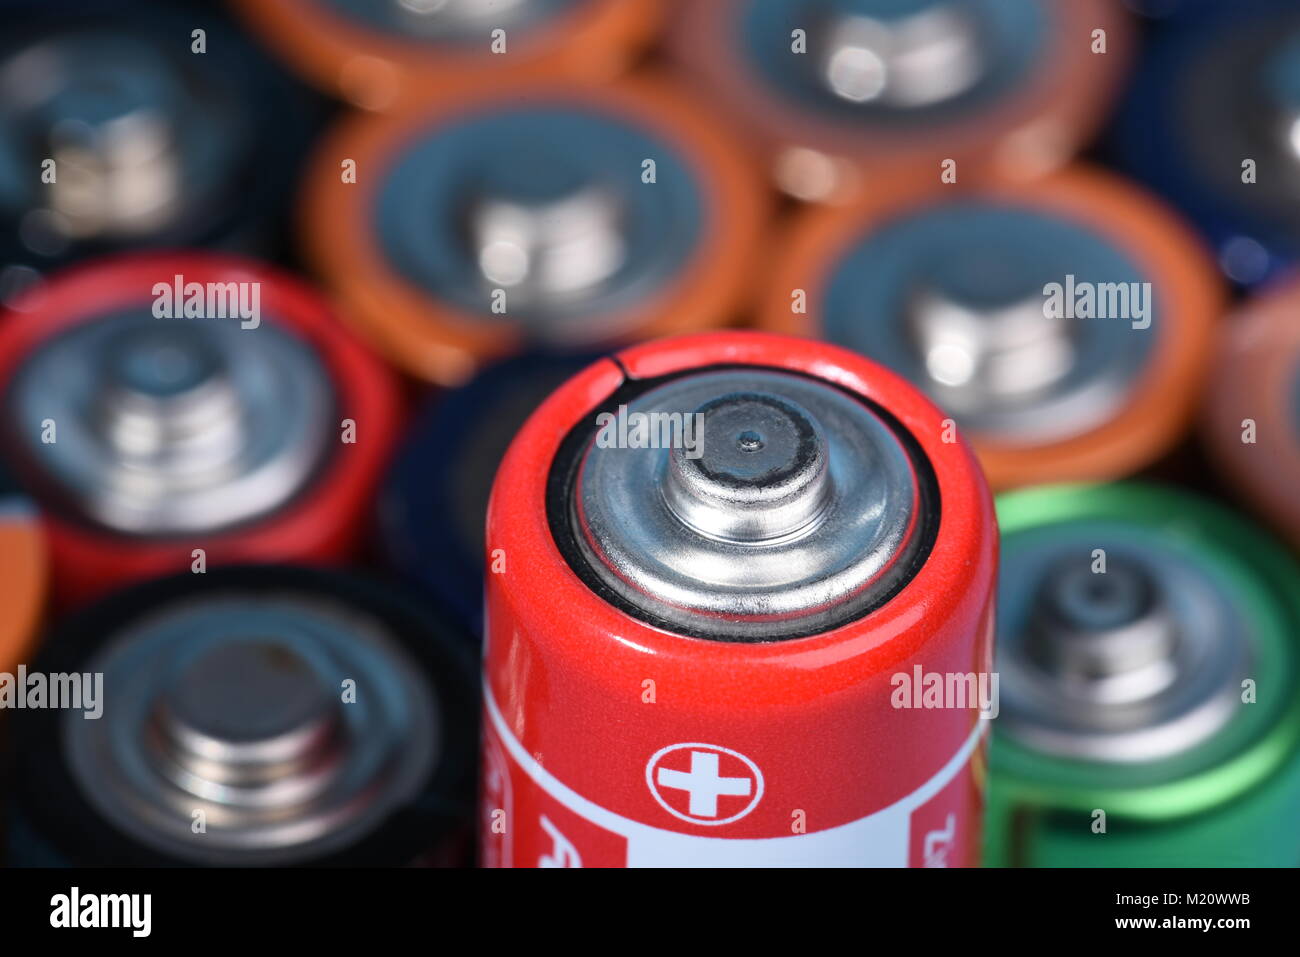 Closeup of alkaline batteries with selective focus on single one Stock Photo